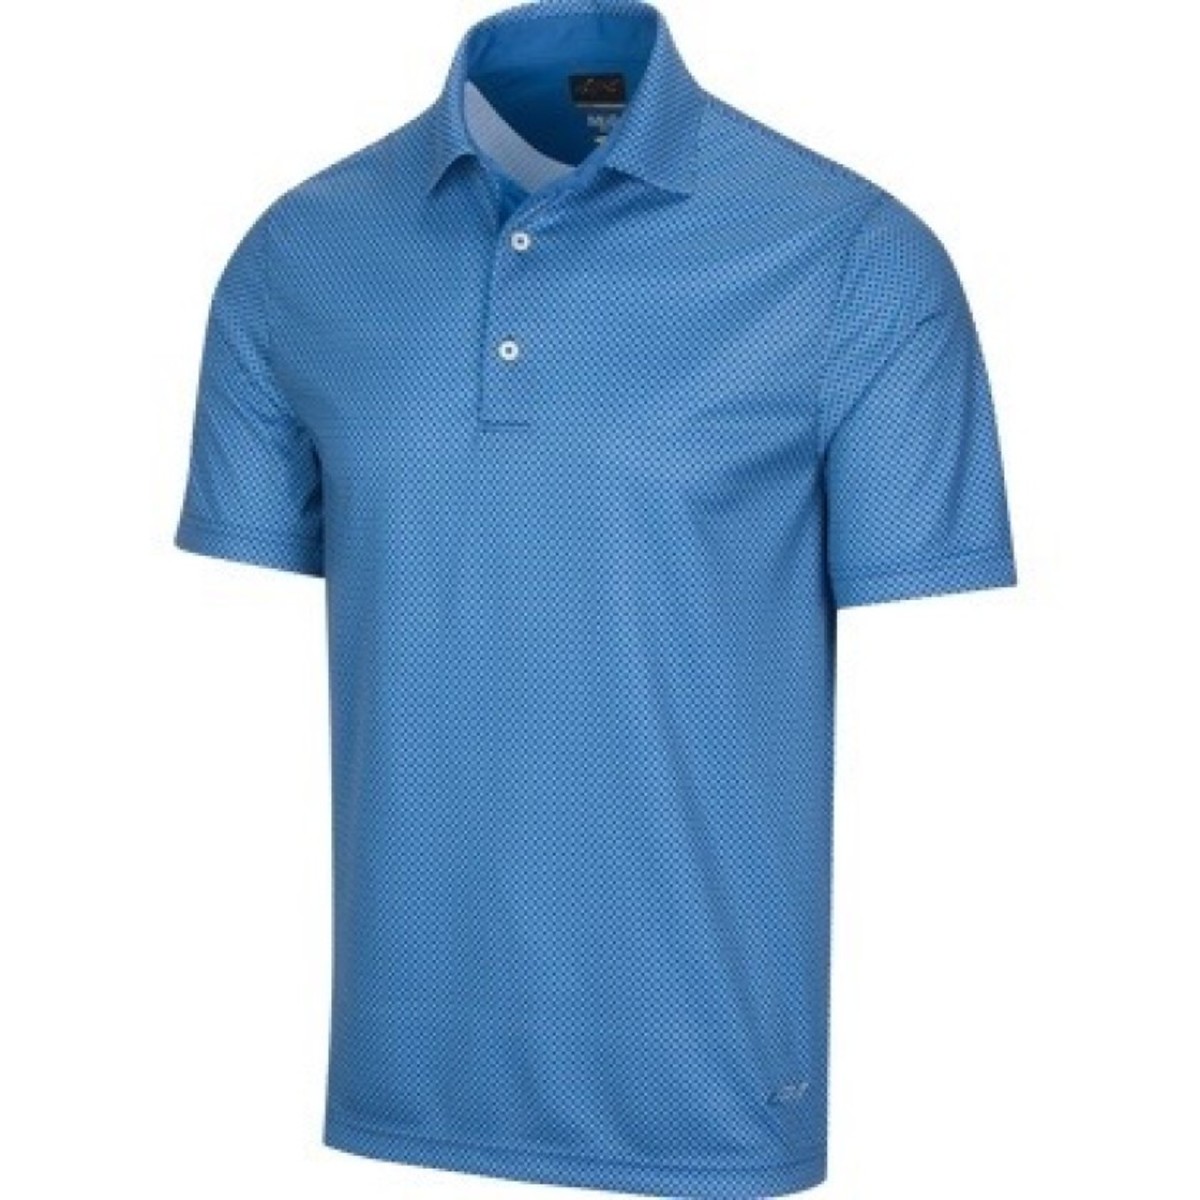 Greg Norman Collection's ML75 2Below Rope Foulard print polo is a standout for any season. 